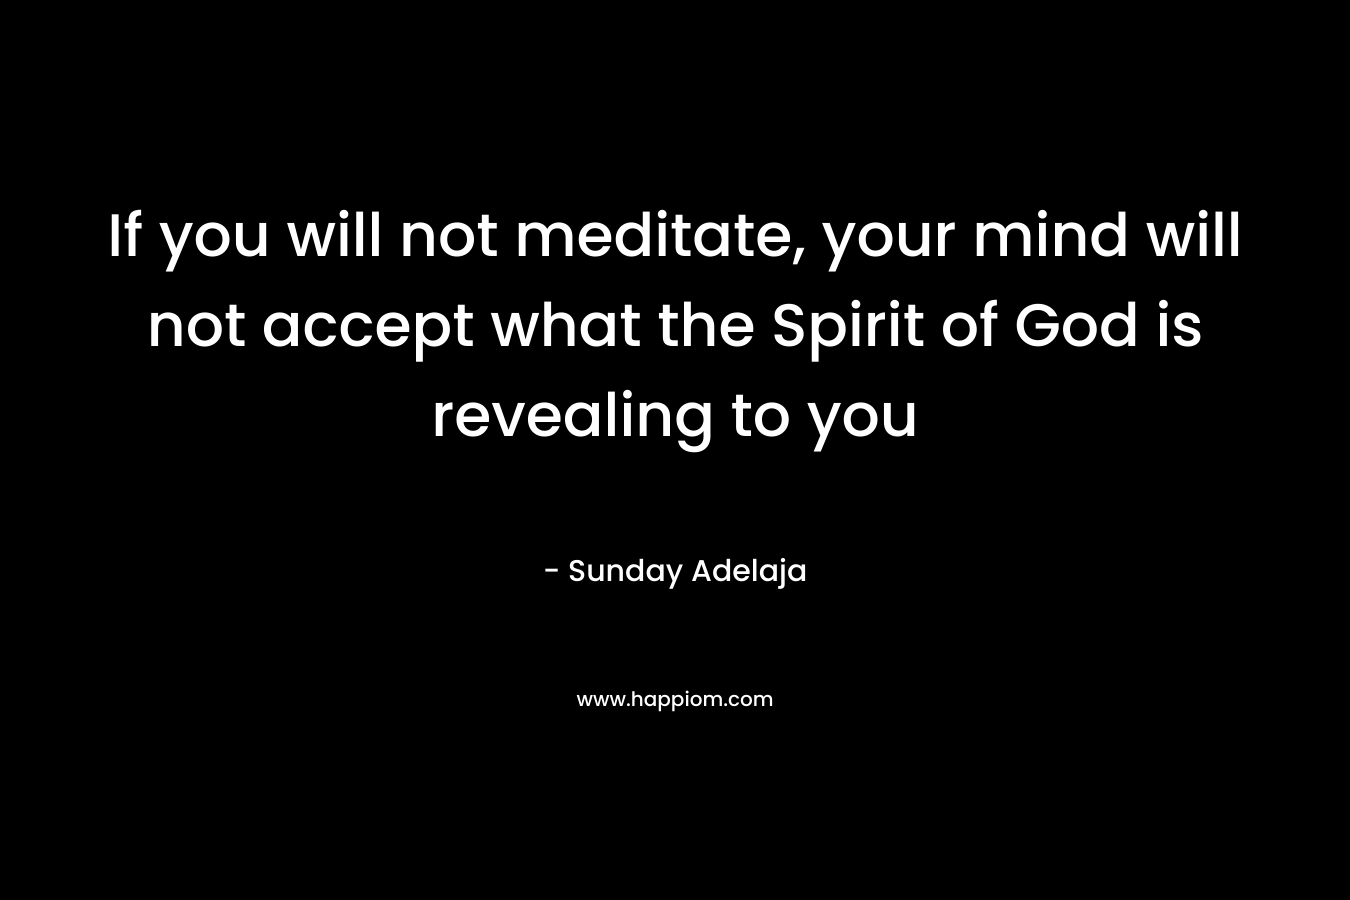 If you will not meditate, your mind will not accept what the Spirit of God is revealing to you